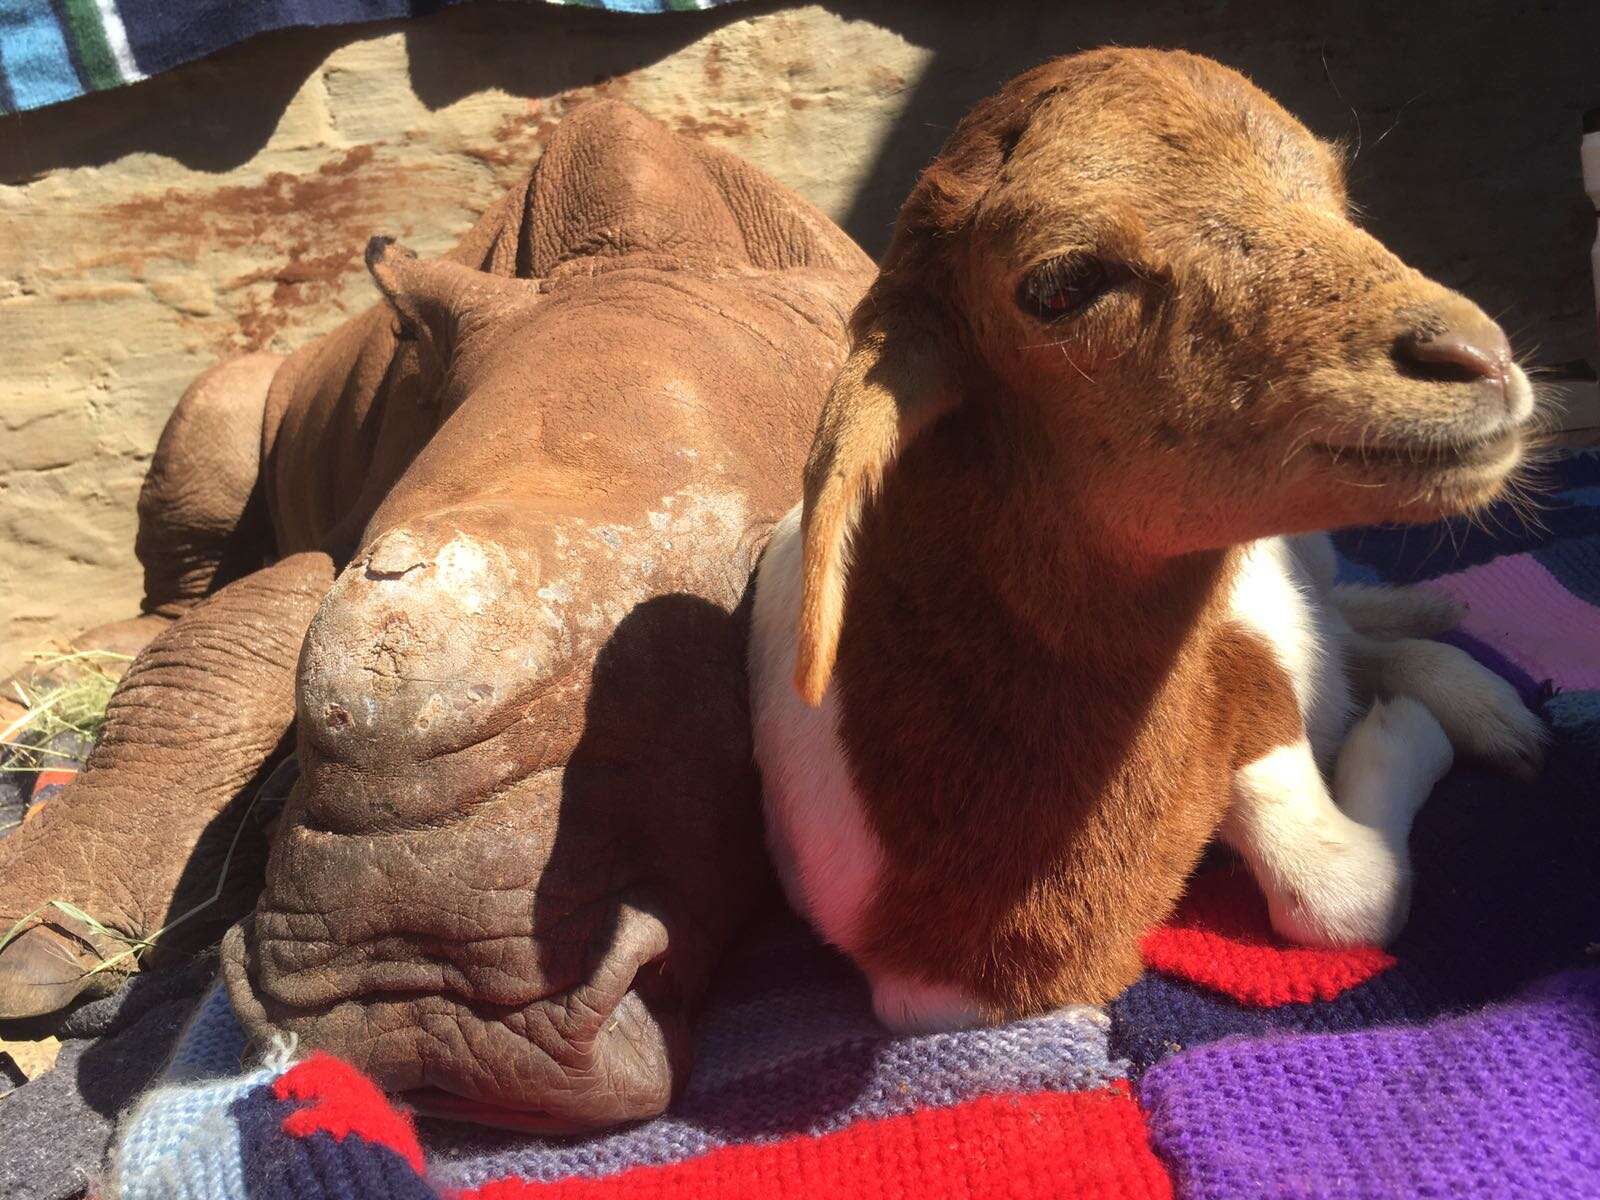 Orphaned rhino and lamb friend at orphanage in South Africa